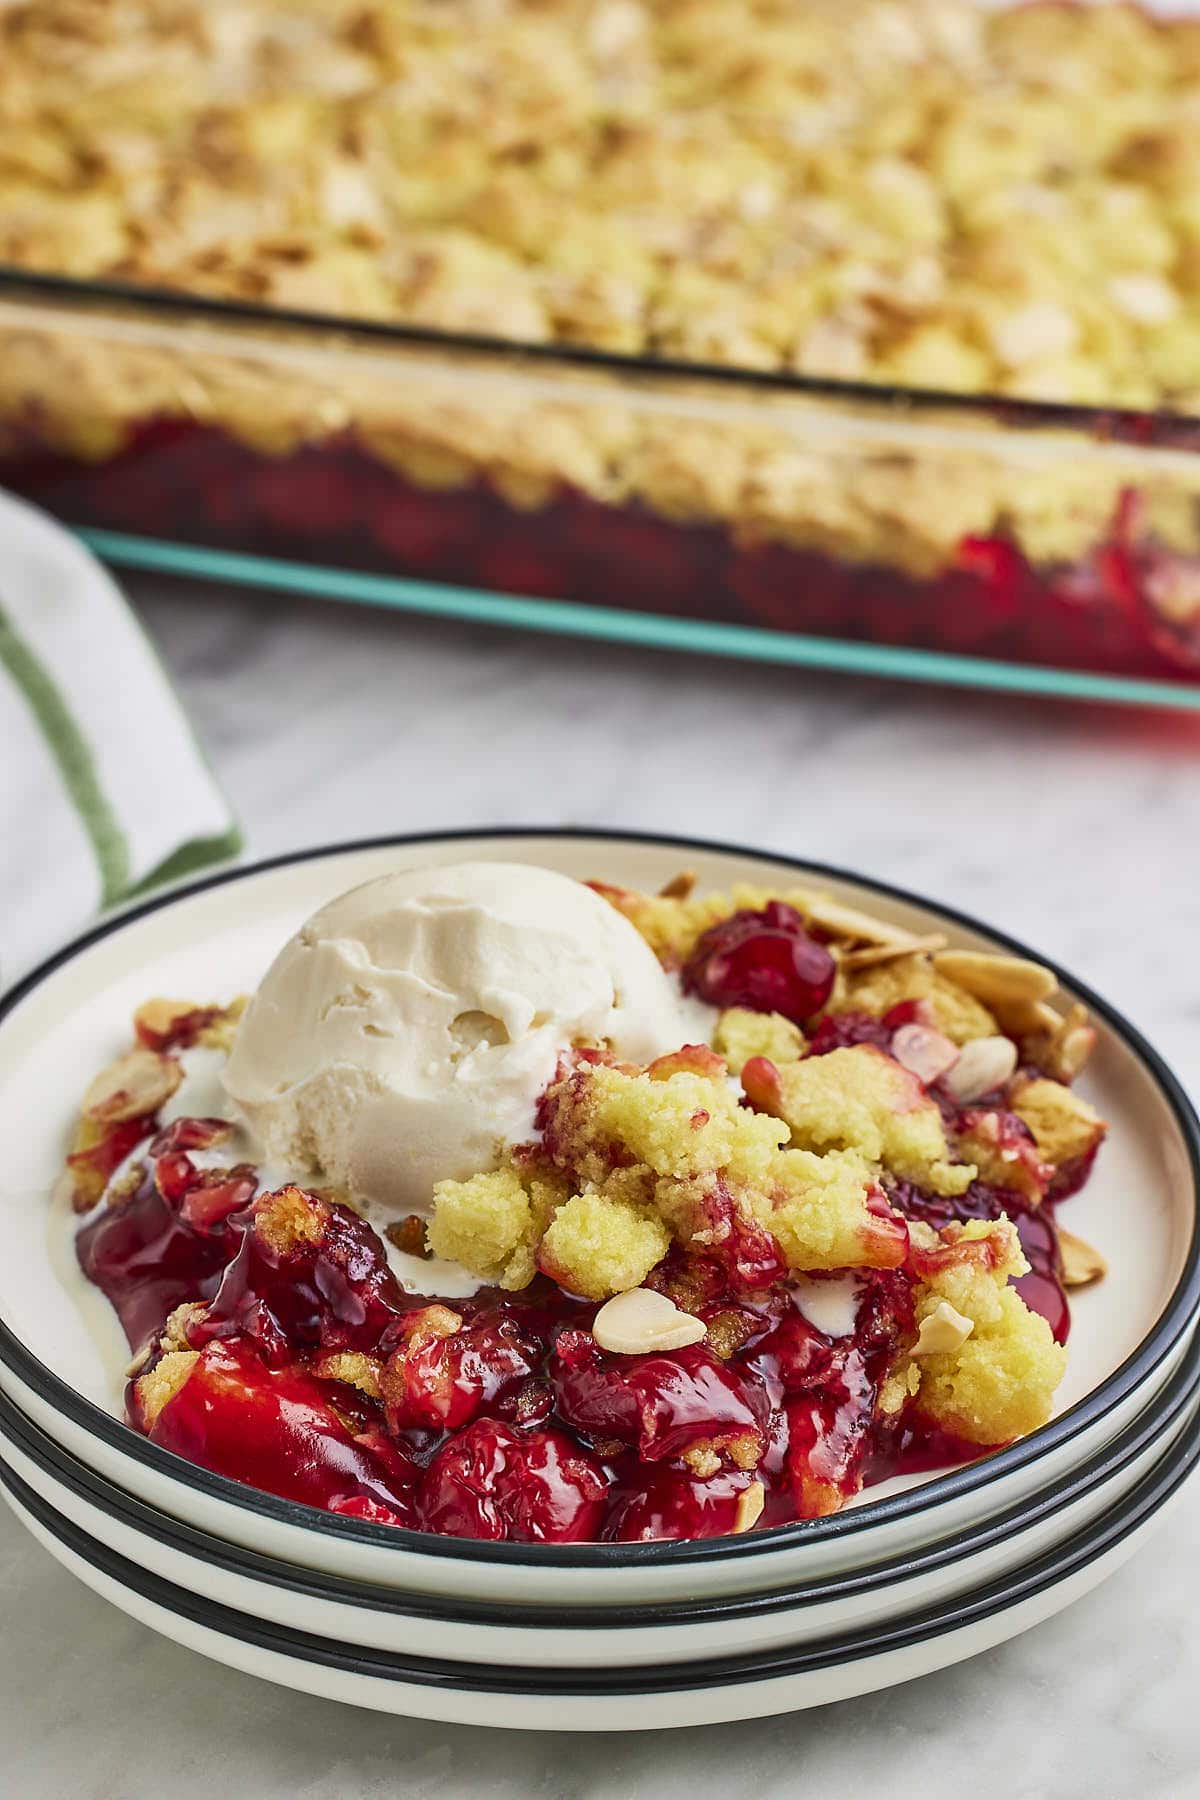 Cherry Dump Cake served on a white plate with vanilla ice cream.